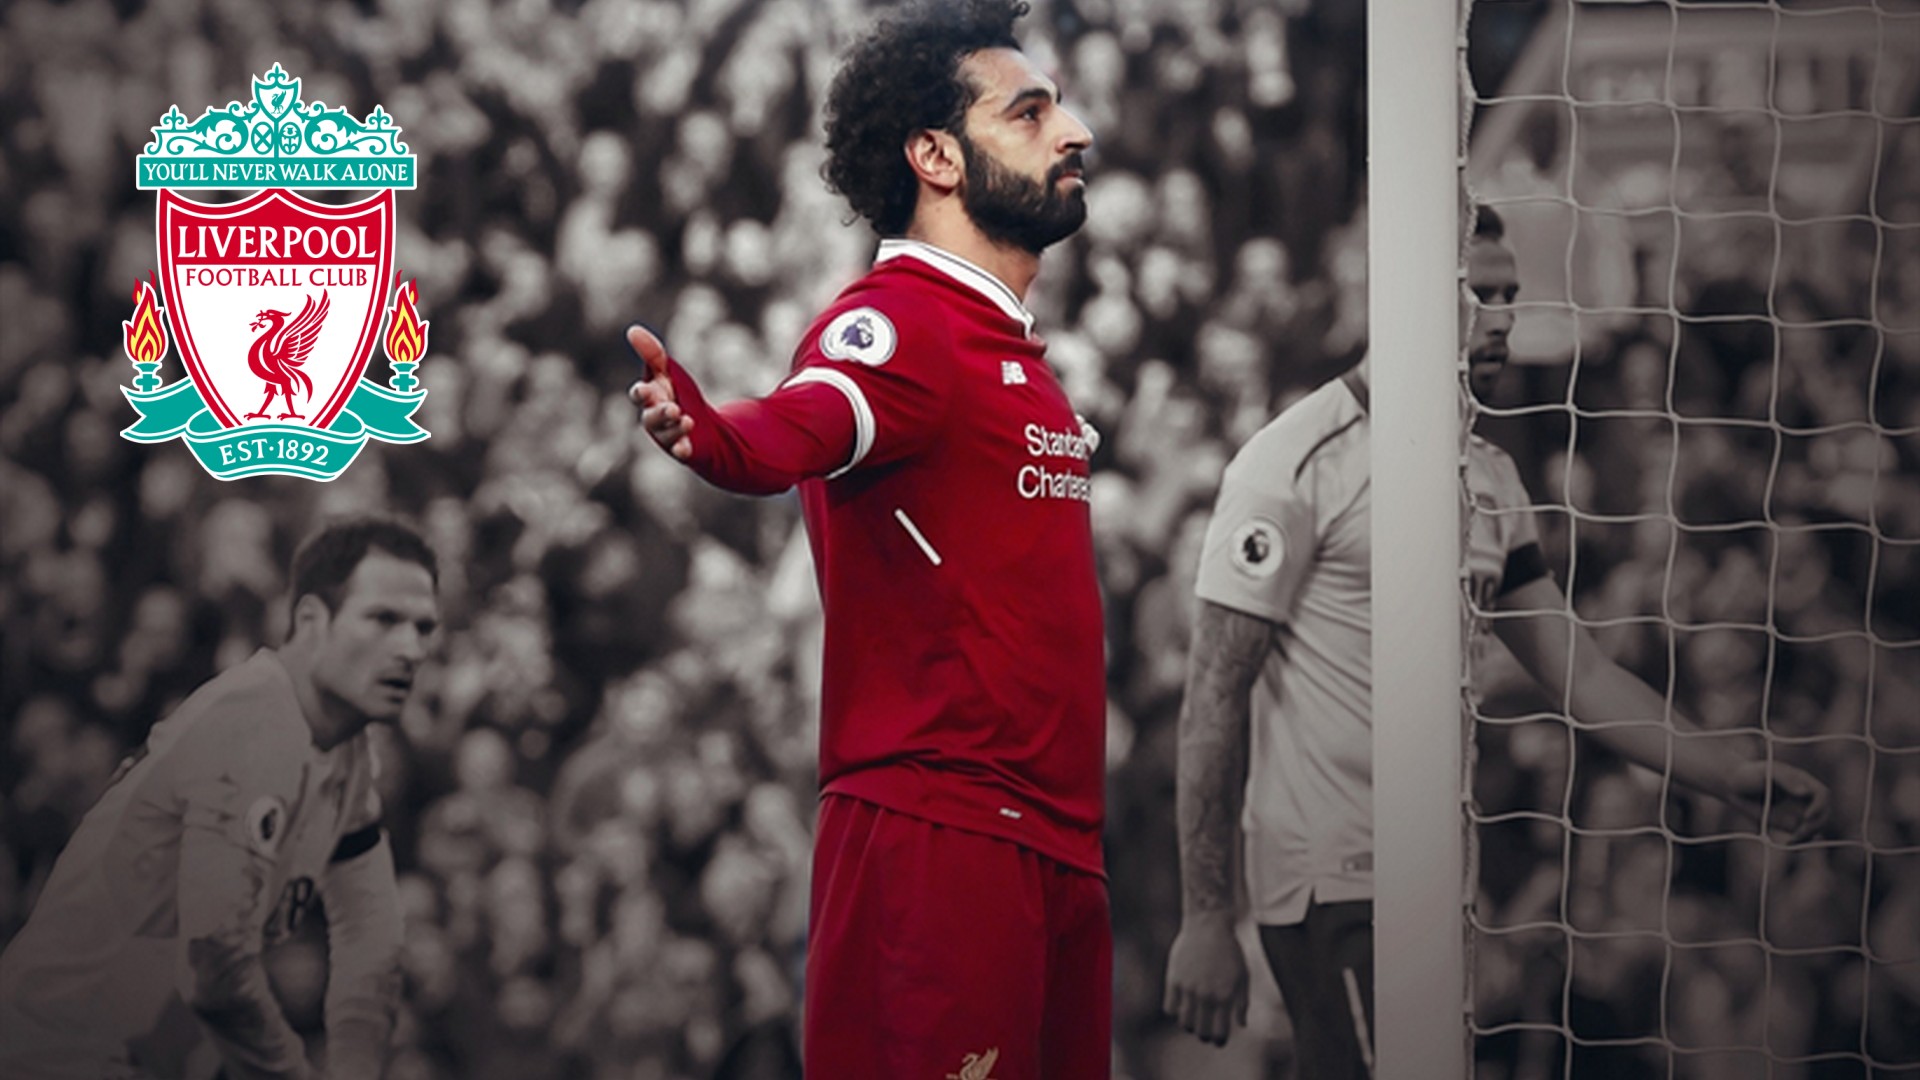 Liverpool Mohamed Salah Wallpaper HD with image resolution 1920x1080 pixel. You can make this wallpaper for your Desktop Computer Backgrounds, Mac Wallpapers, Android Lock screen or iPhone Screensavers